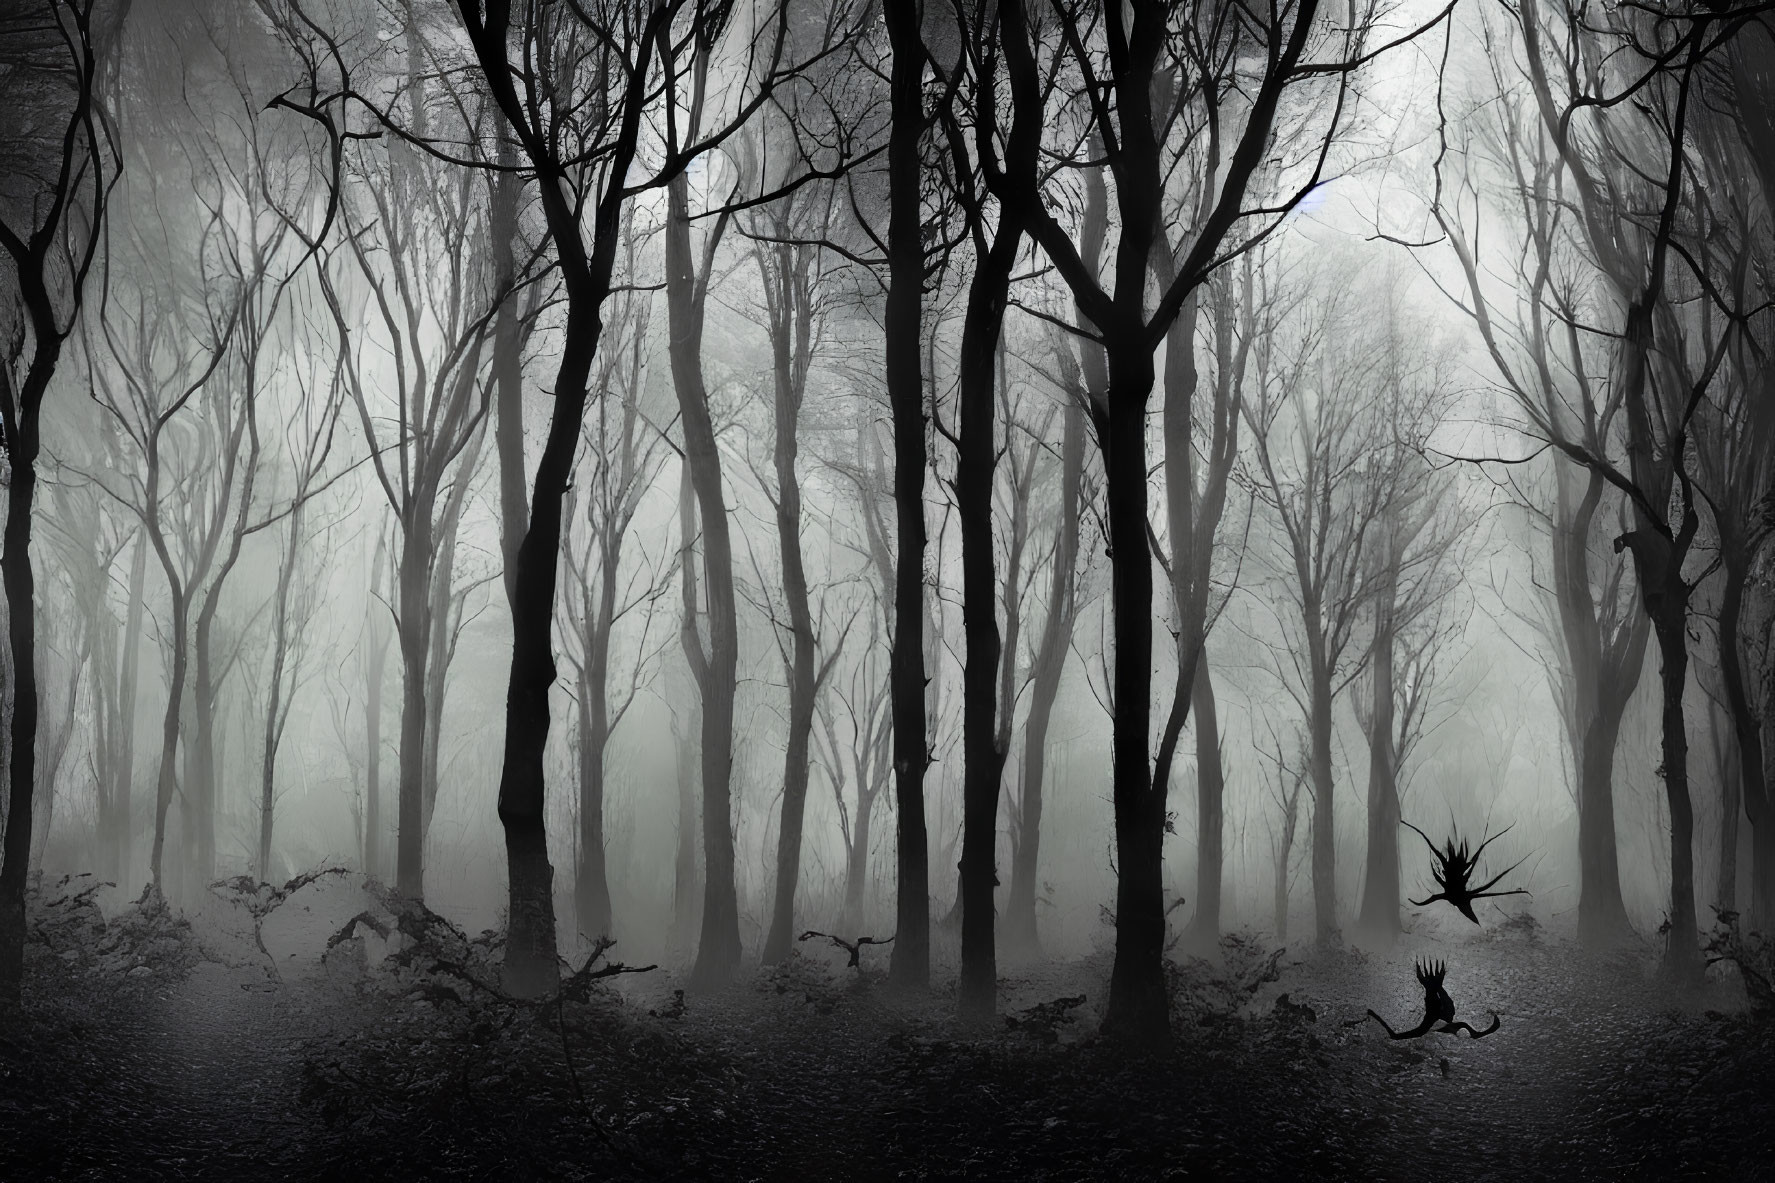 Foggy forest with eerie trees in dark ambiance